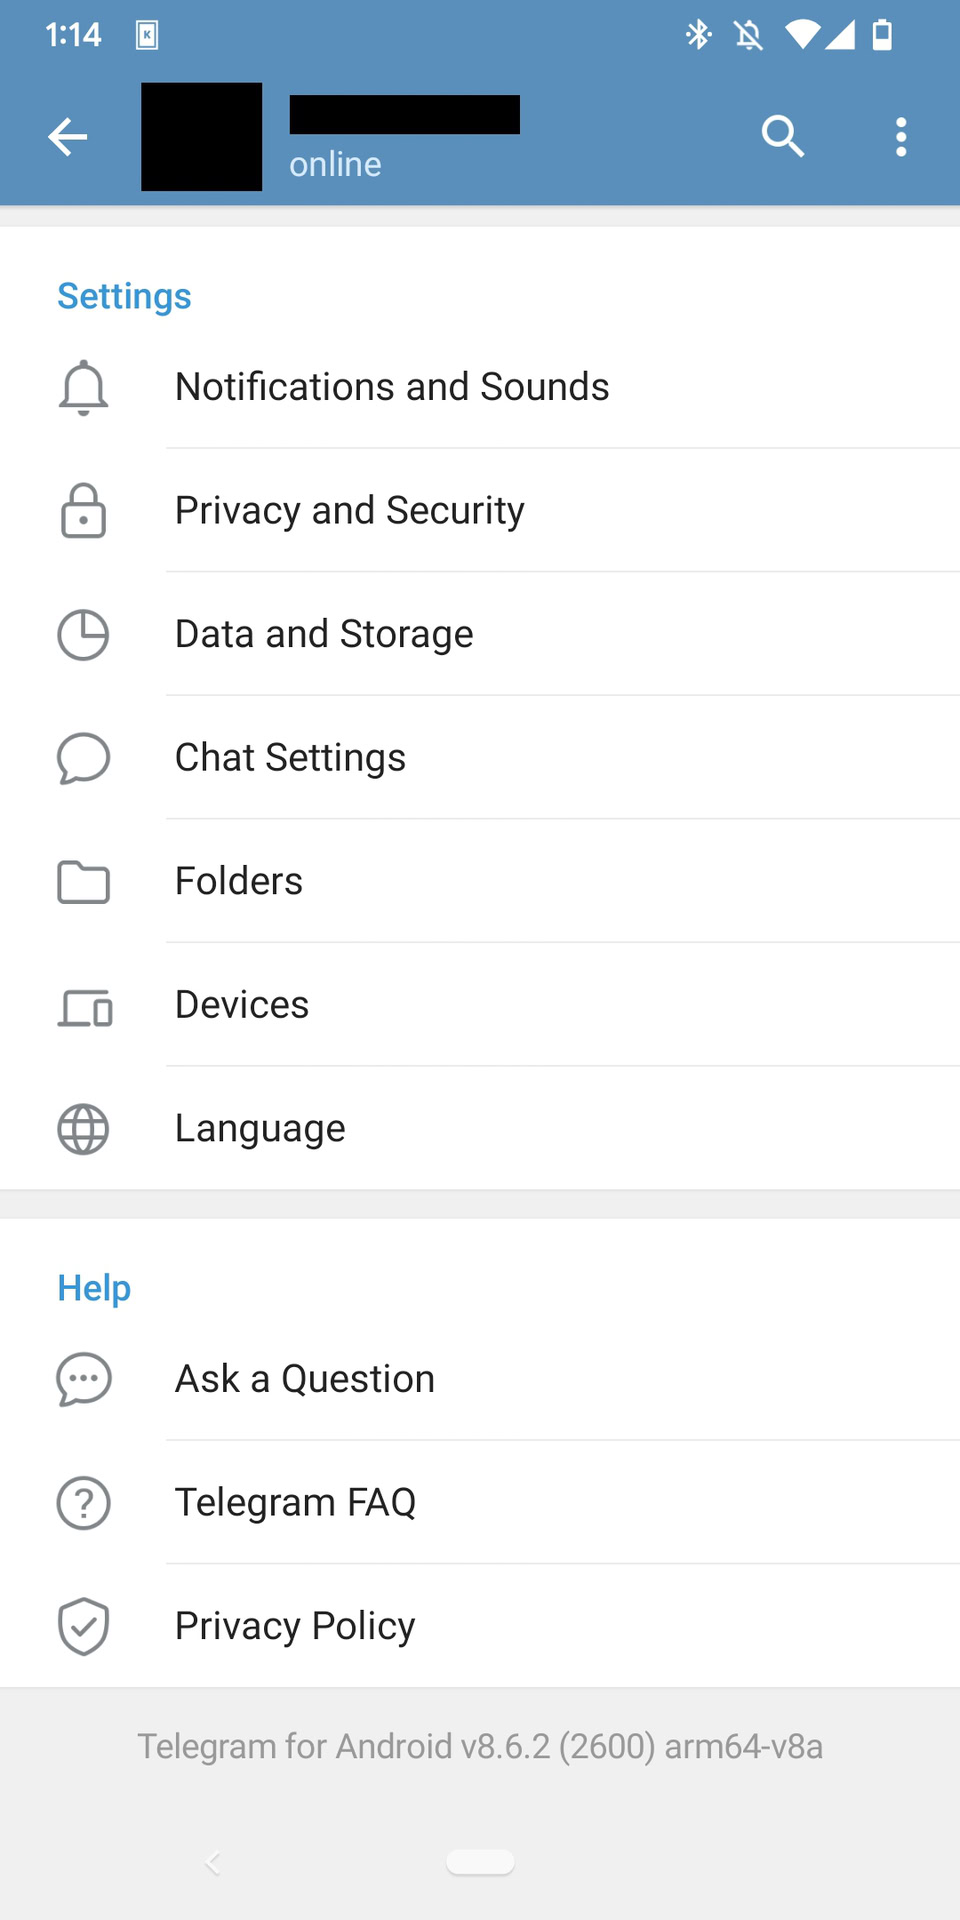 The Telegram settings menu open with the 'Privacy and Security' option visible.